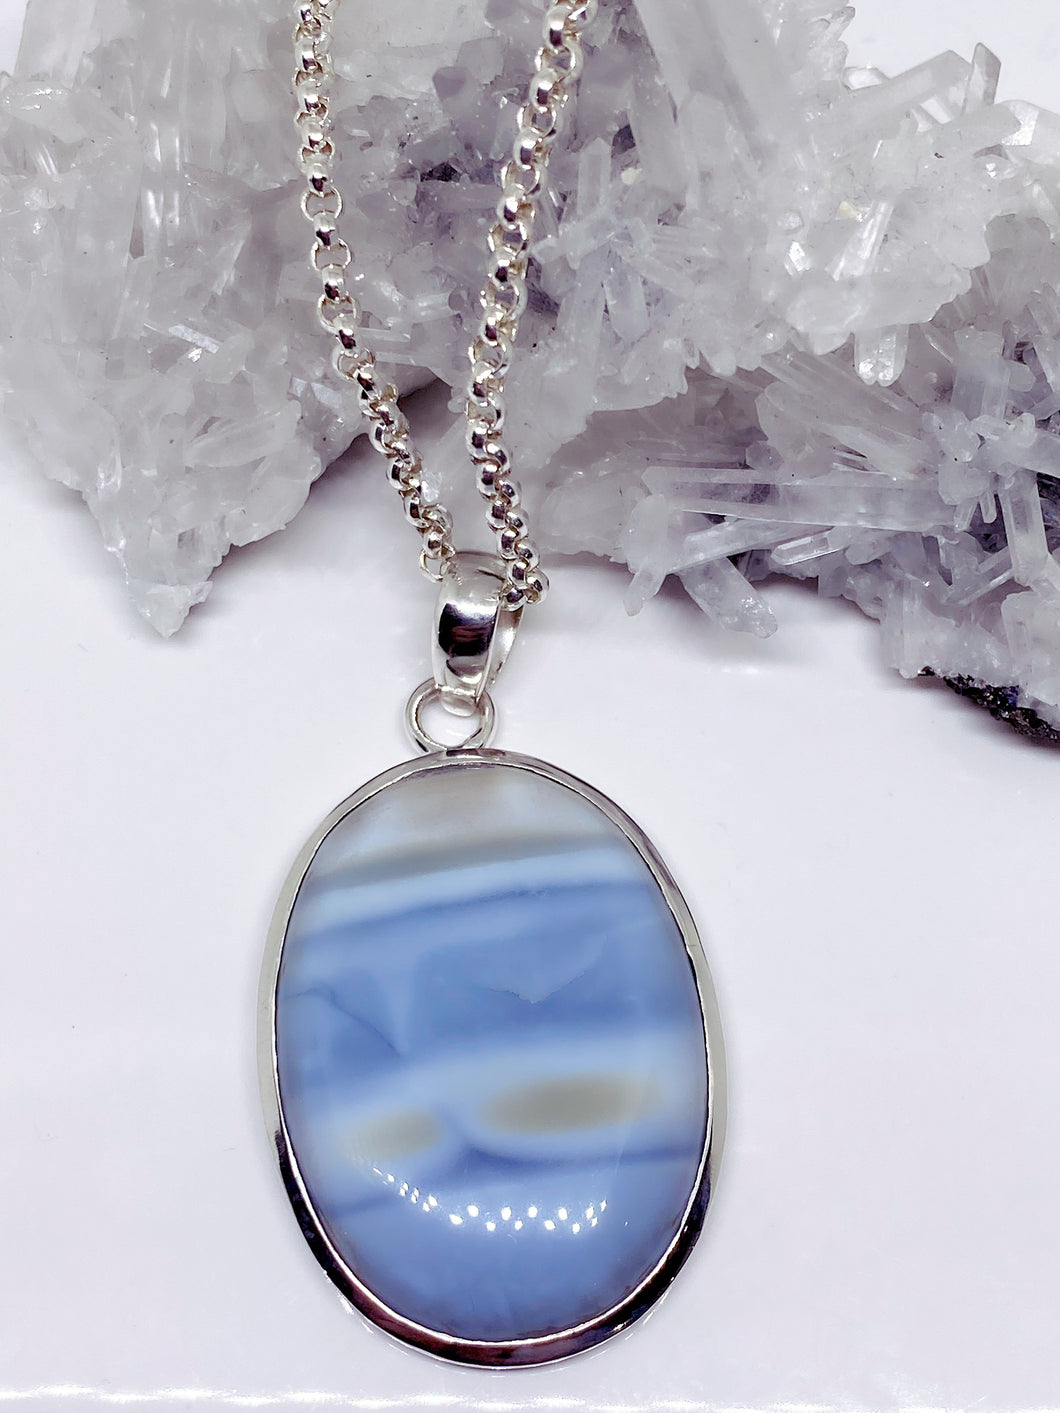 Peruvian Blue Opal Pendant - Sterling Silver with Chain